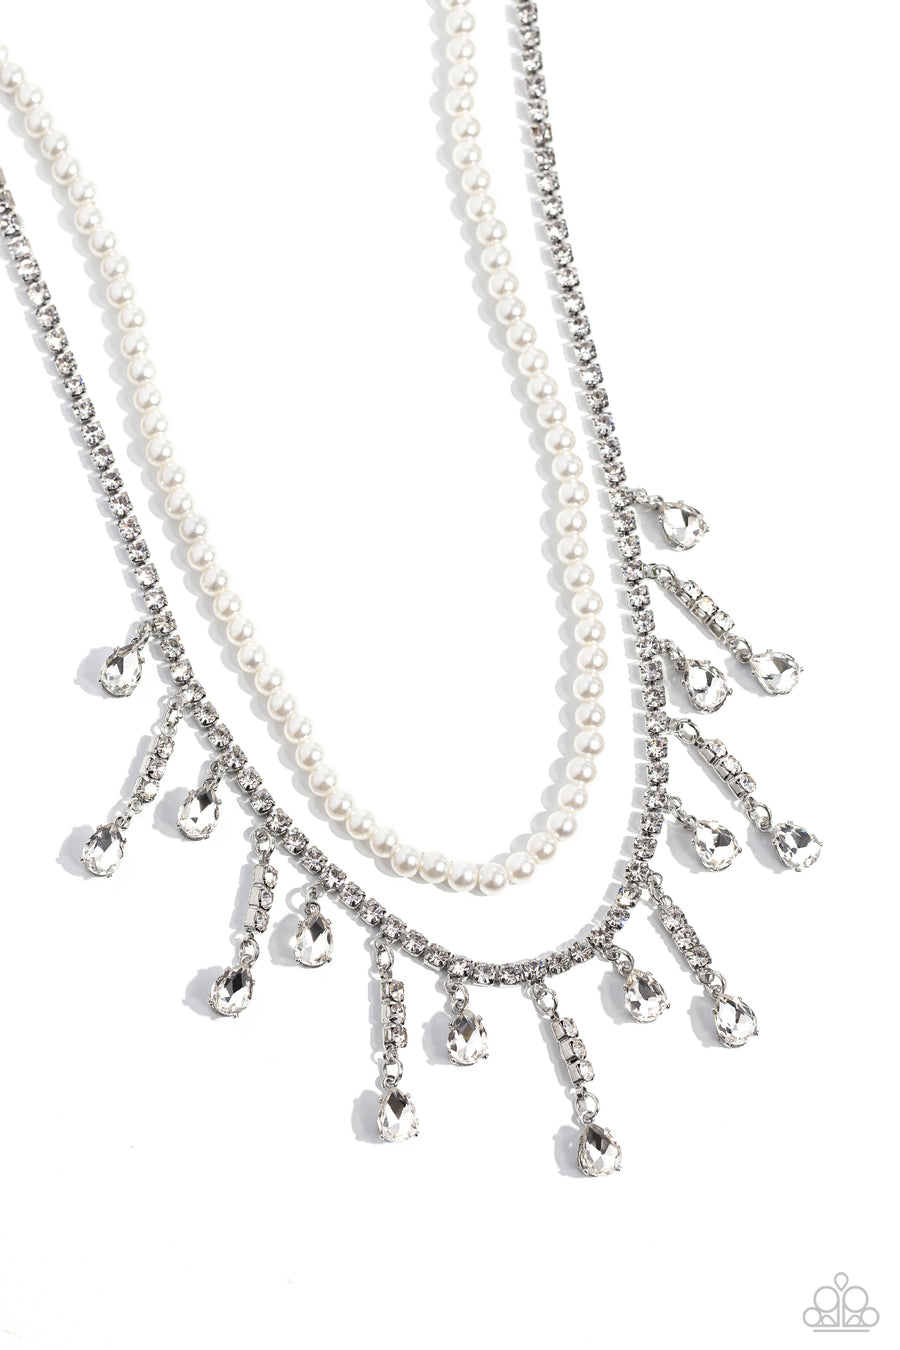 Lessons in Luxury - White and Silver Necklace - Paparazzi Accessories - Featuring a white rhinestone square-fitting chain, white teardrop-cut gems, bordered in silver pronged fittings, swing from streams of glittery rhinestones while solitaire teardrop gems drip in an alternating pattern. A strand of gleaming white pearls layers above the silver display for a luxurious finish around the collar.